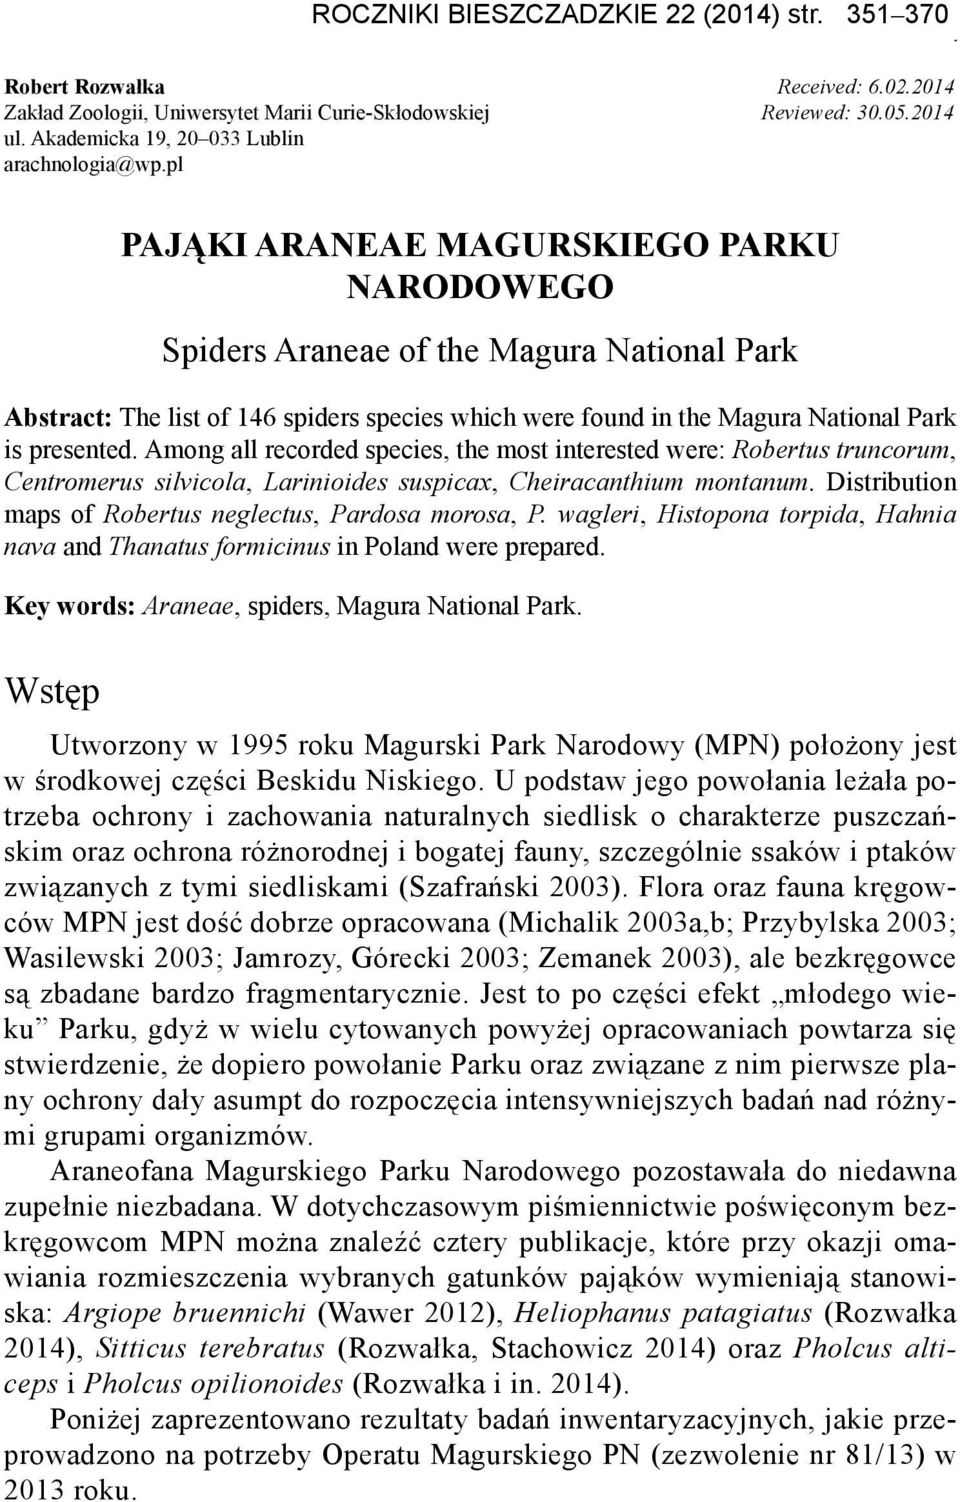 pl Pająki Araneae Magurskiego Parku Narodowego Spiders Araneae of the Magura National Park Abstract: The list of 146 spiders species which were found in the Magura National Park is presented.